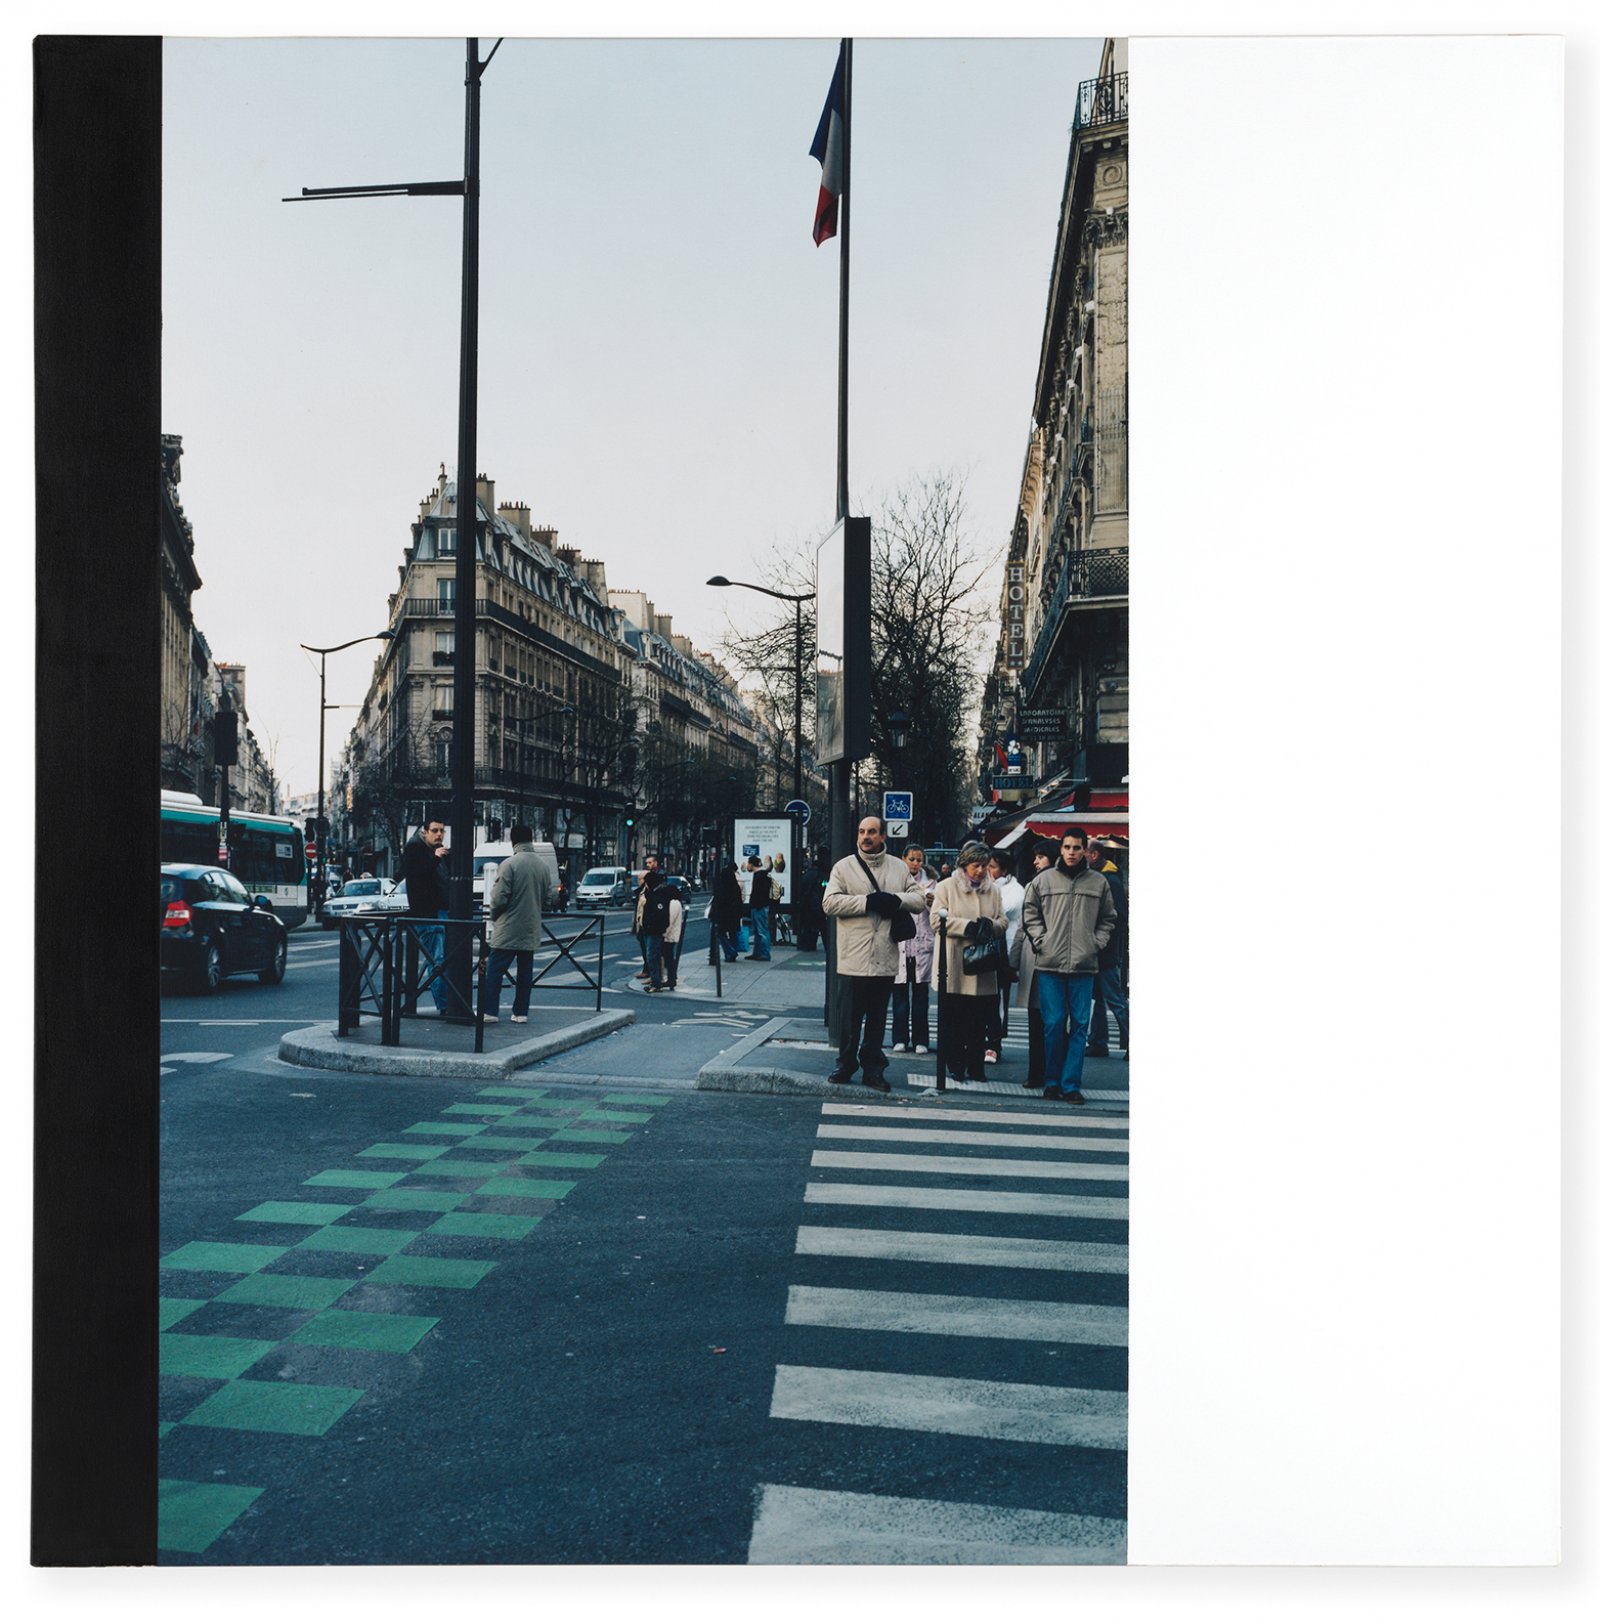 Ian Wallace, Intersection, Paris (January 27, 2007) I, 2007, photolaminate with acrylic on canvas, 72 x 72 x 1 1/8 in. (183 x 183 x 3 cm